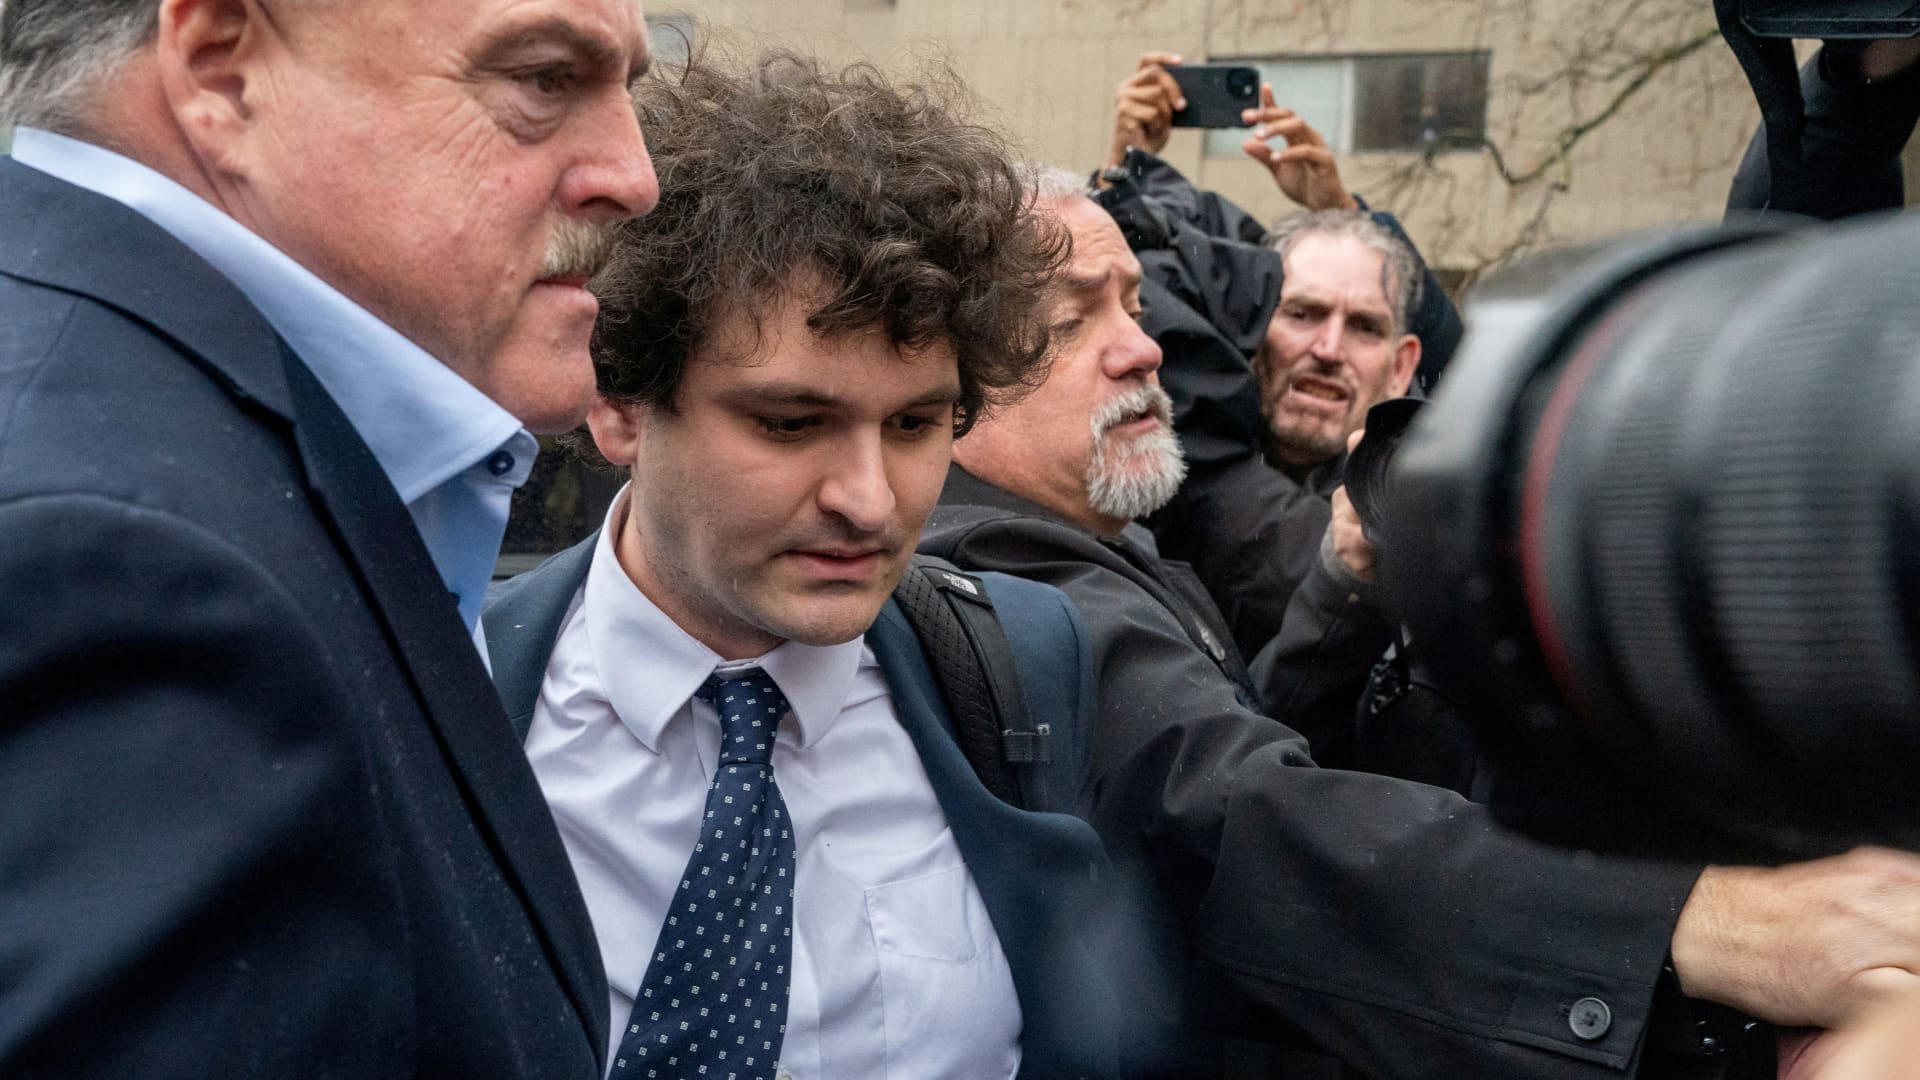 Former FTX Chief Executive Sam Bankman-Fried, who faces fraud charges over the collapse of the bankrupt cryptocurrency exchange, arrives on the day of a hearing at Manhattan federal court in New York City, January 3, 2023.